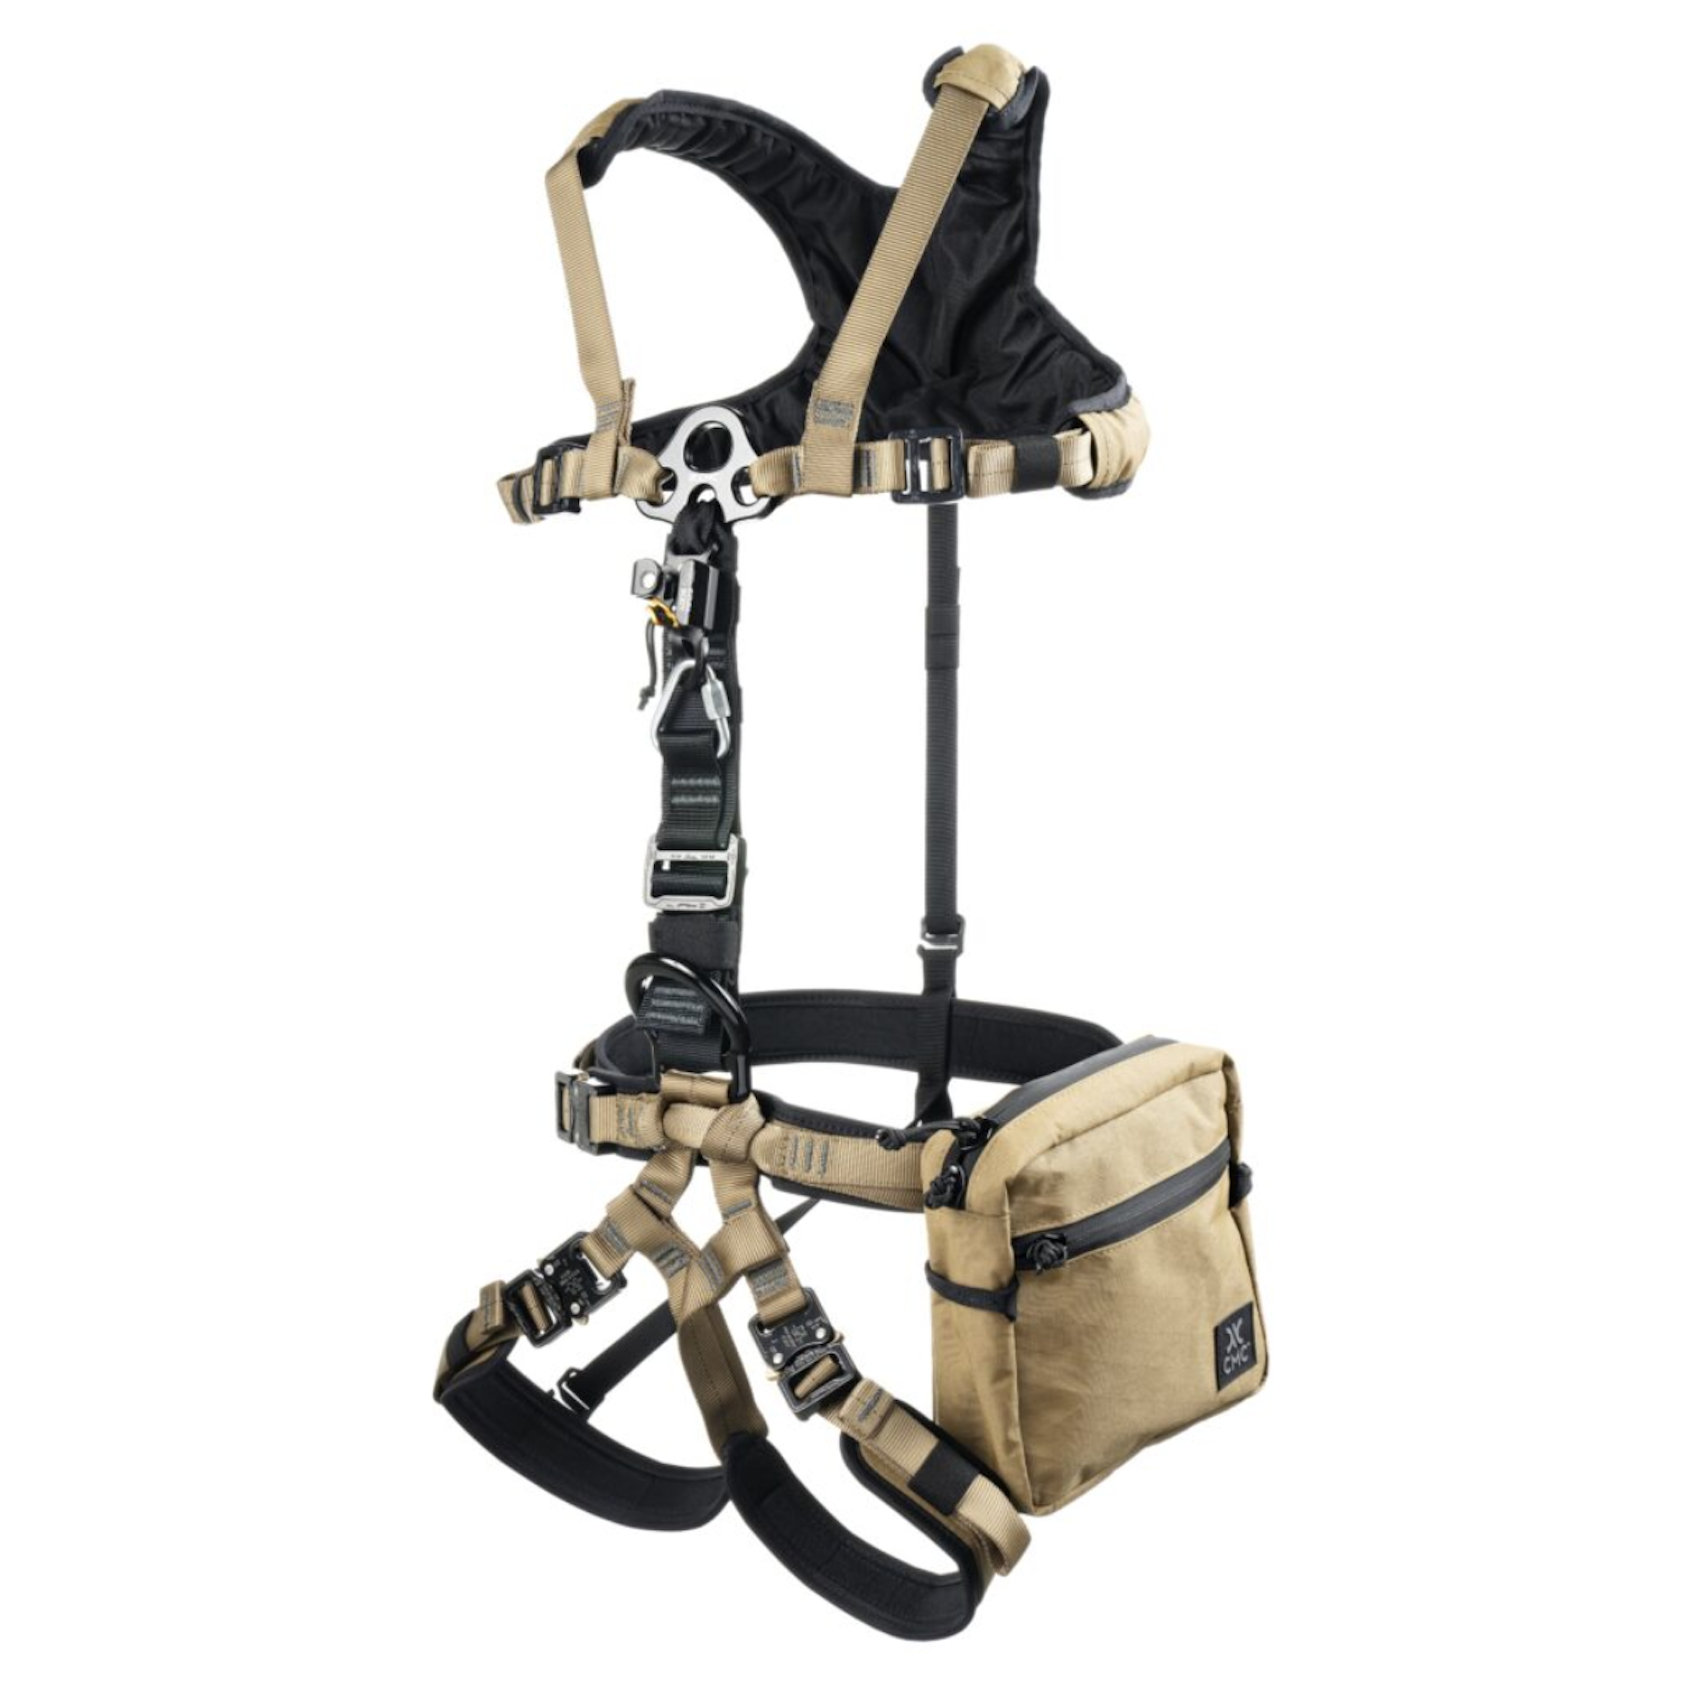 CMC Outback Harness with pouch